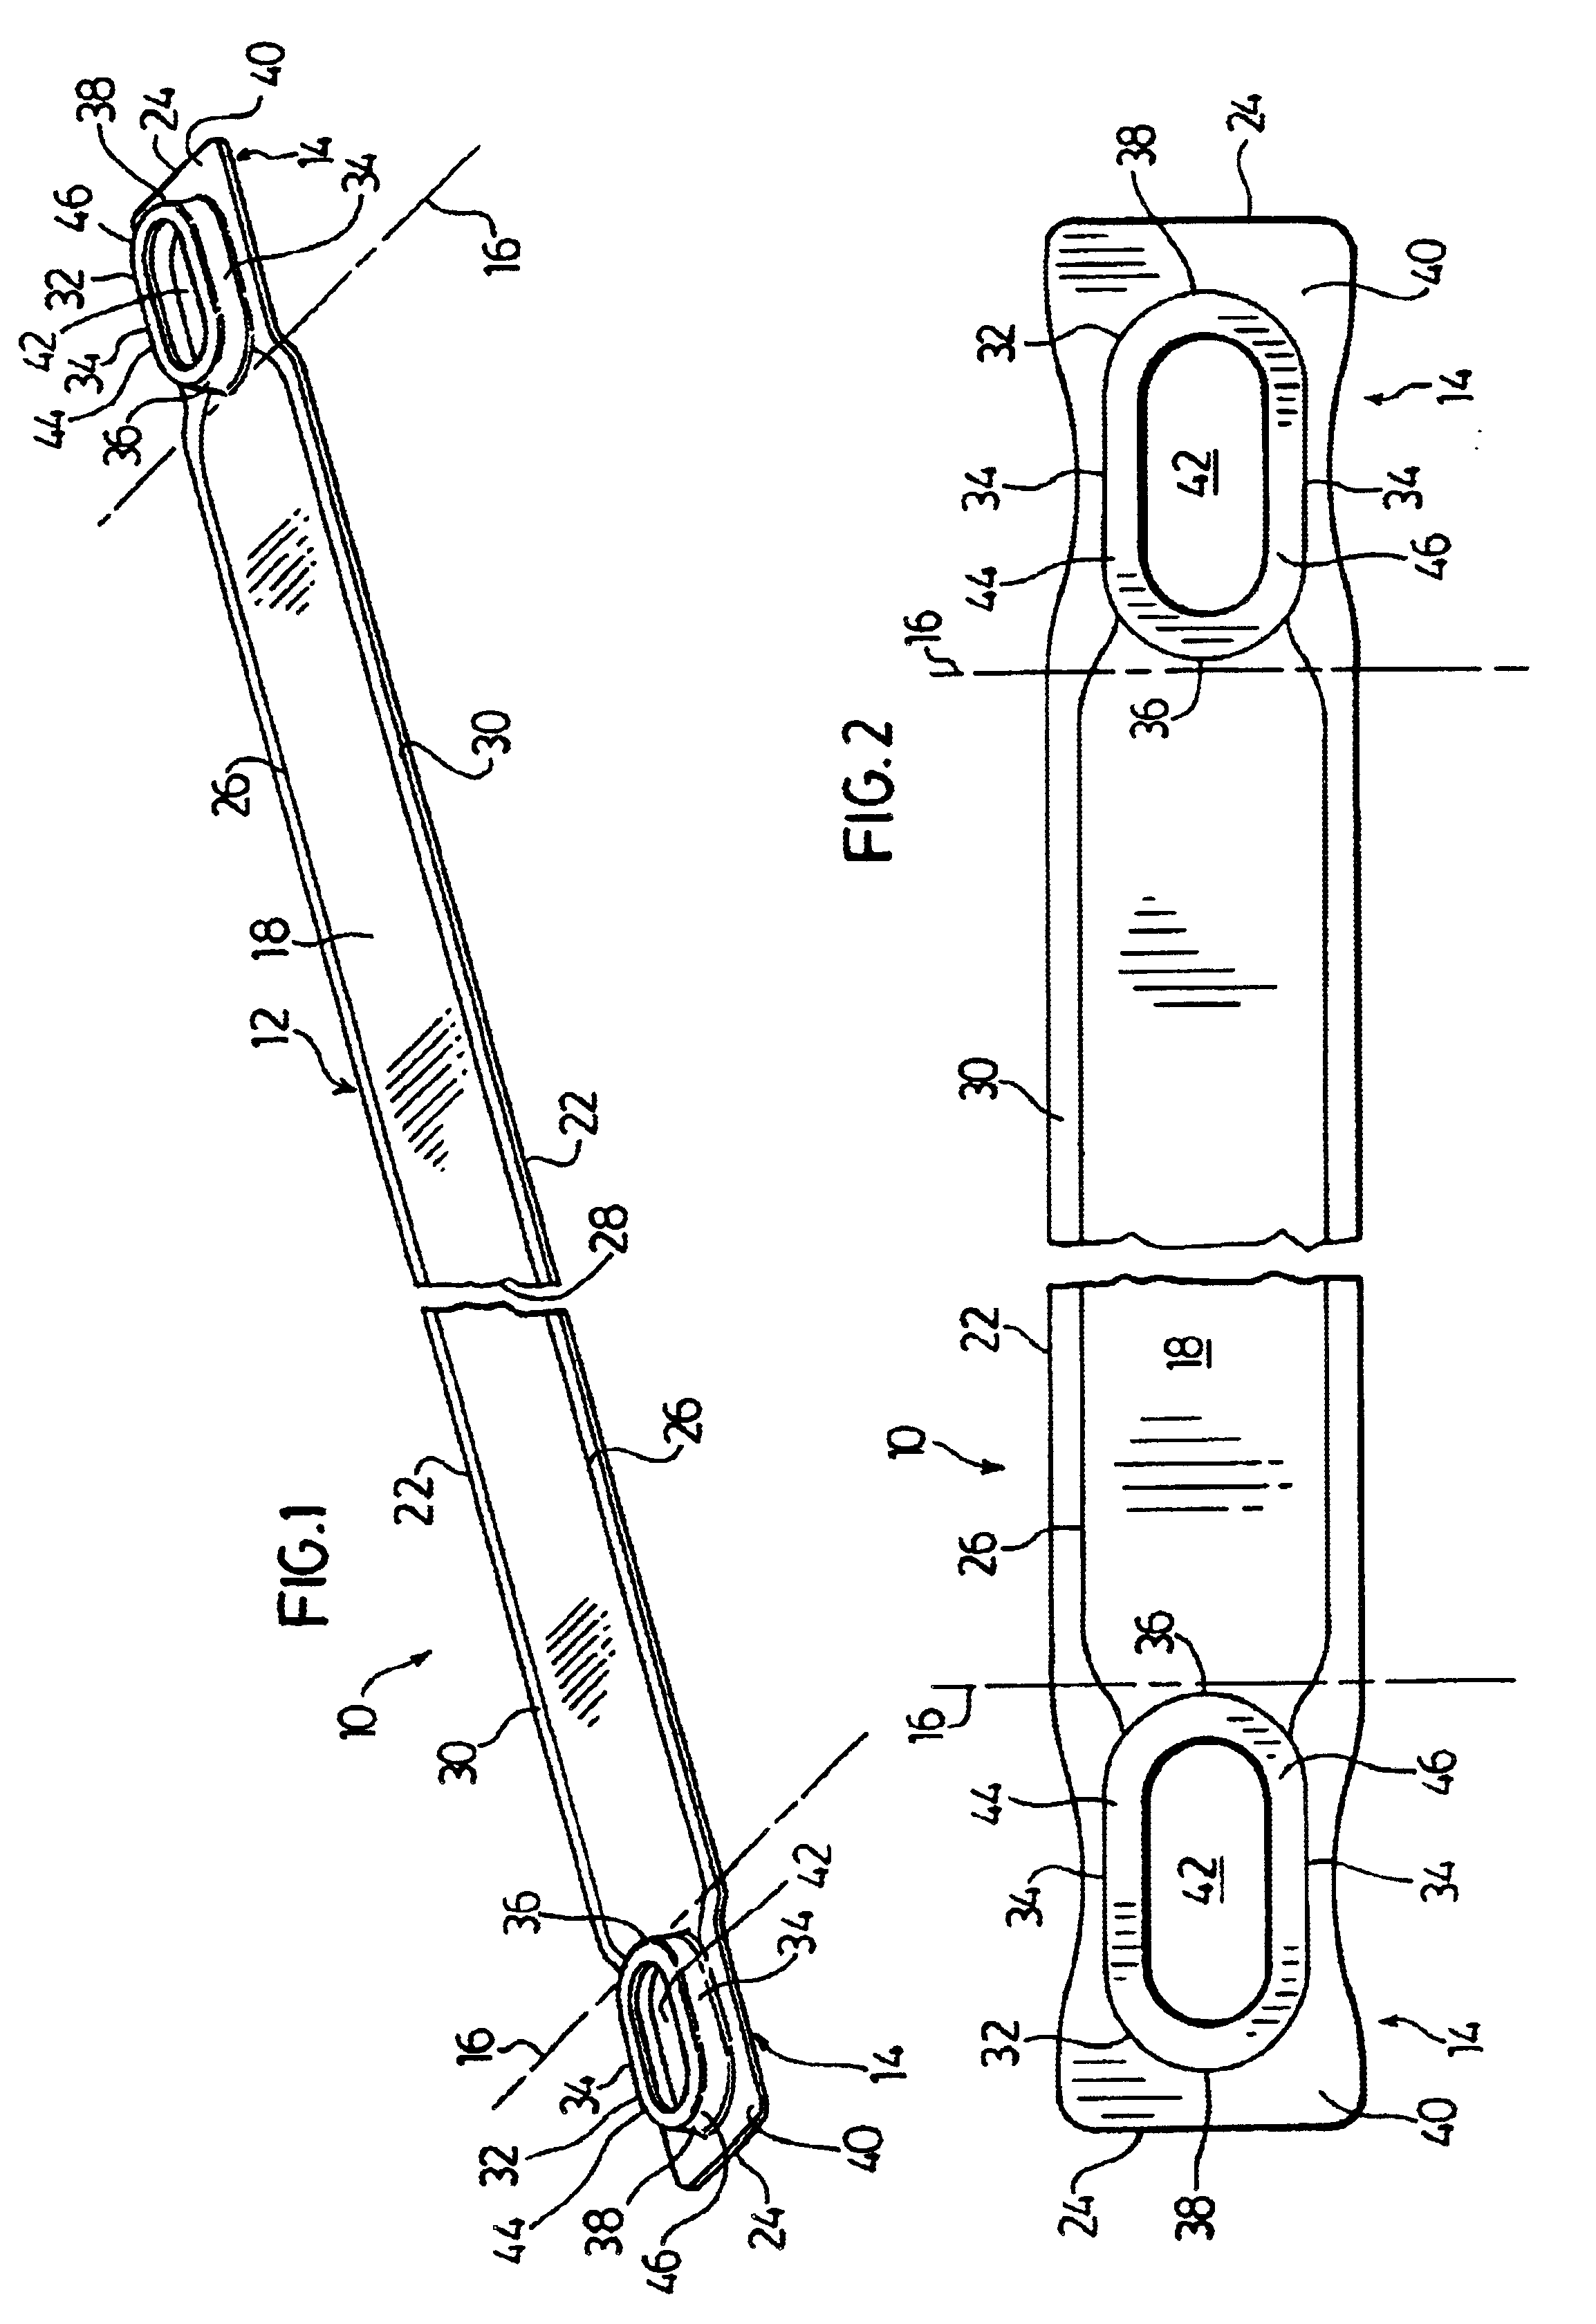 Heat exchanger plates and manufacturing method